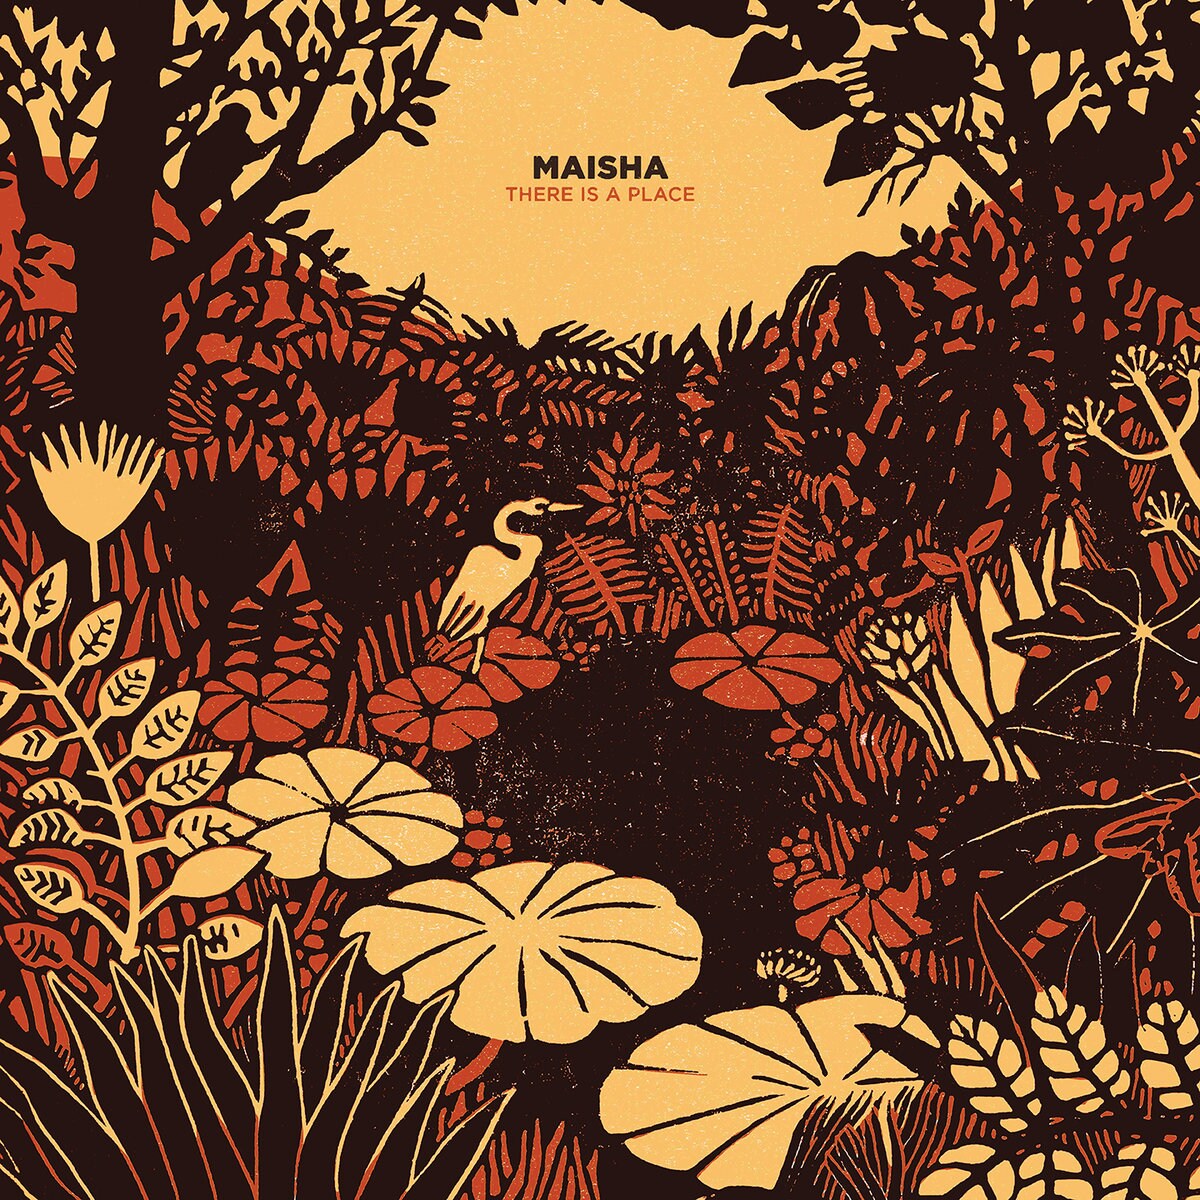 2. Maisha - There Is A Place